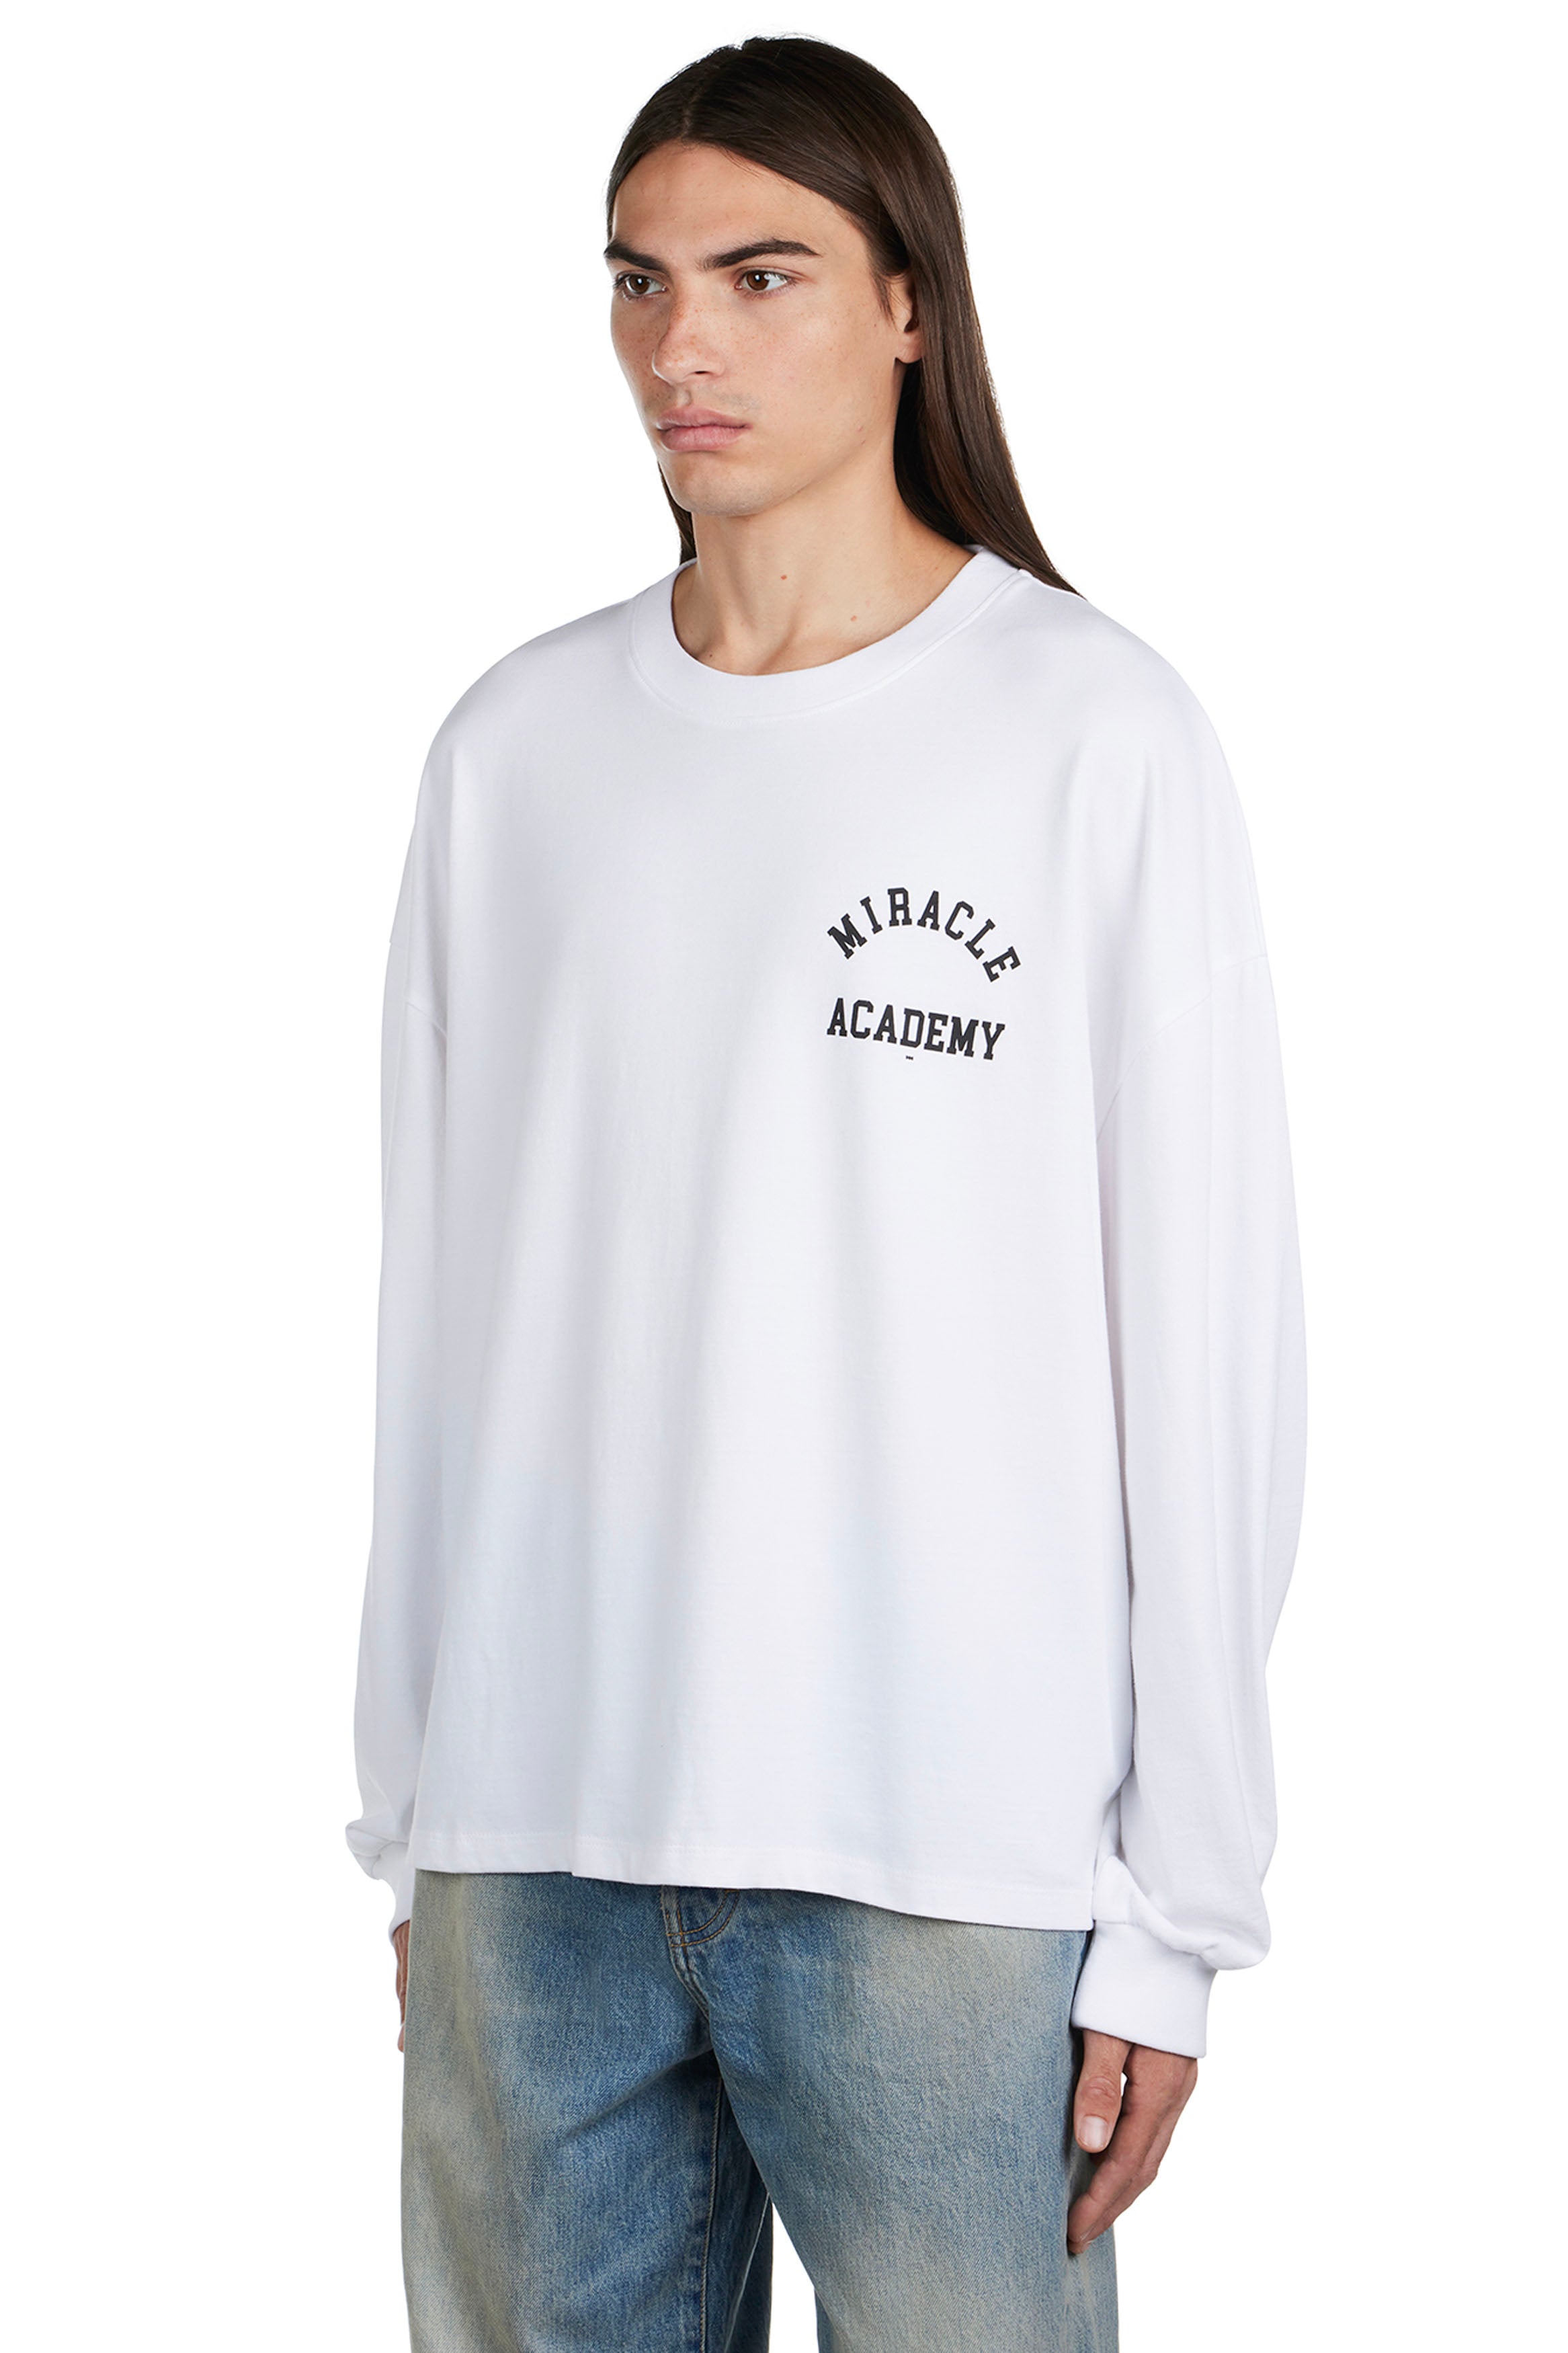 Miracle Academy L/S T-shirt